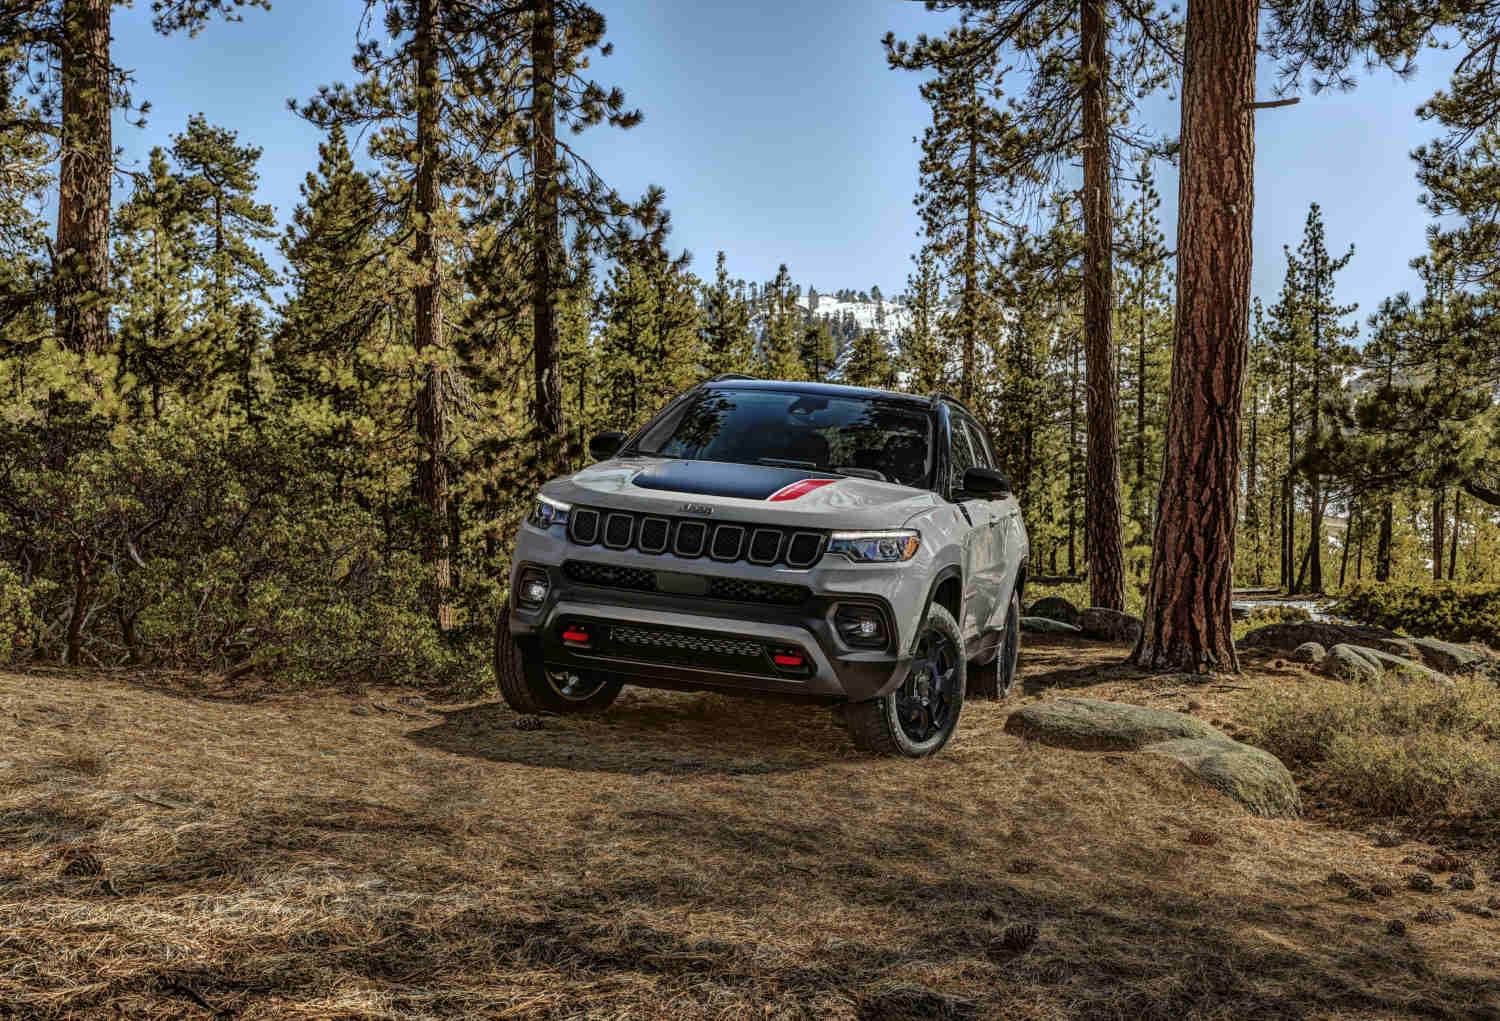 This compact SUV is the 2023 Jeep Compass